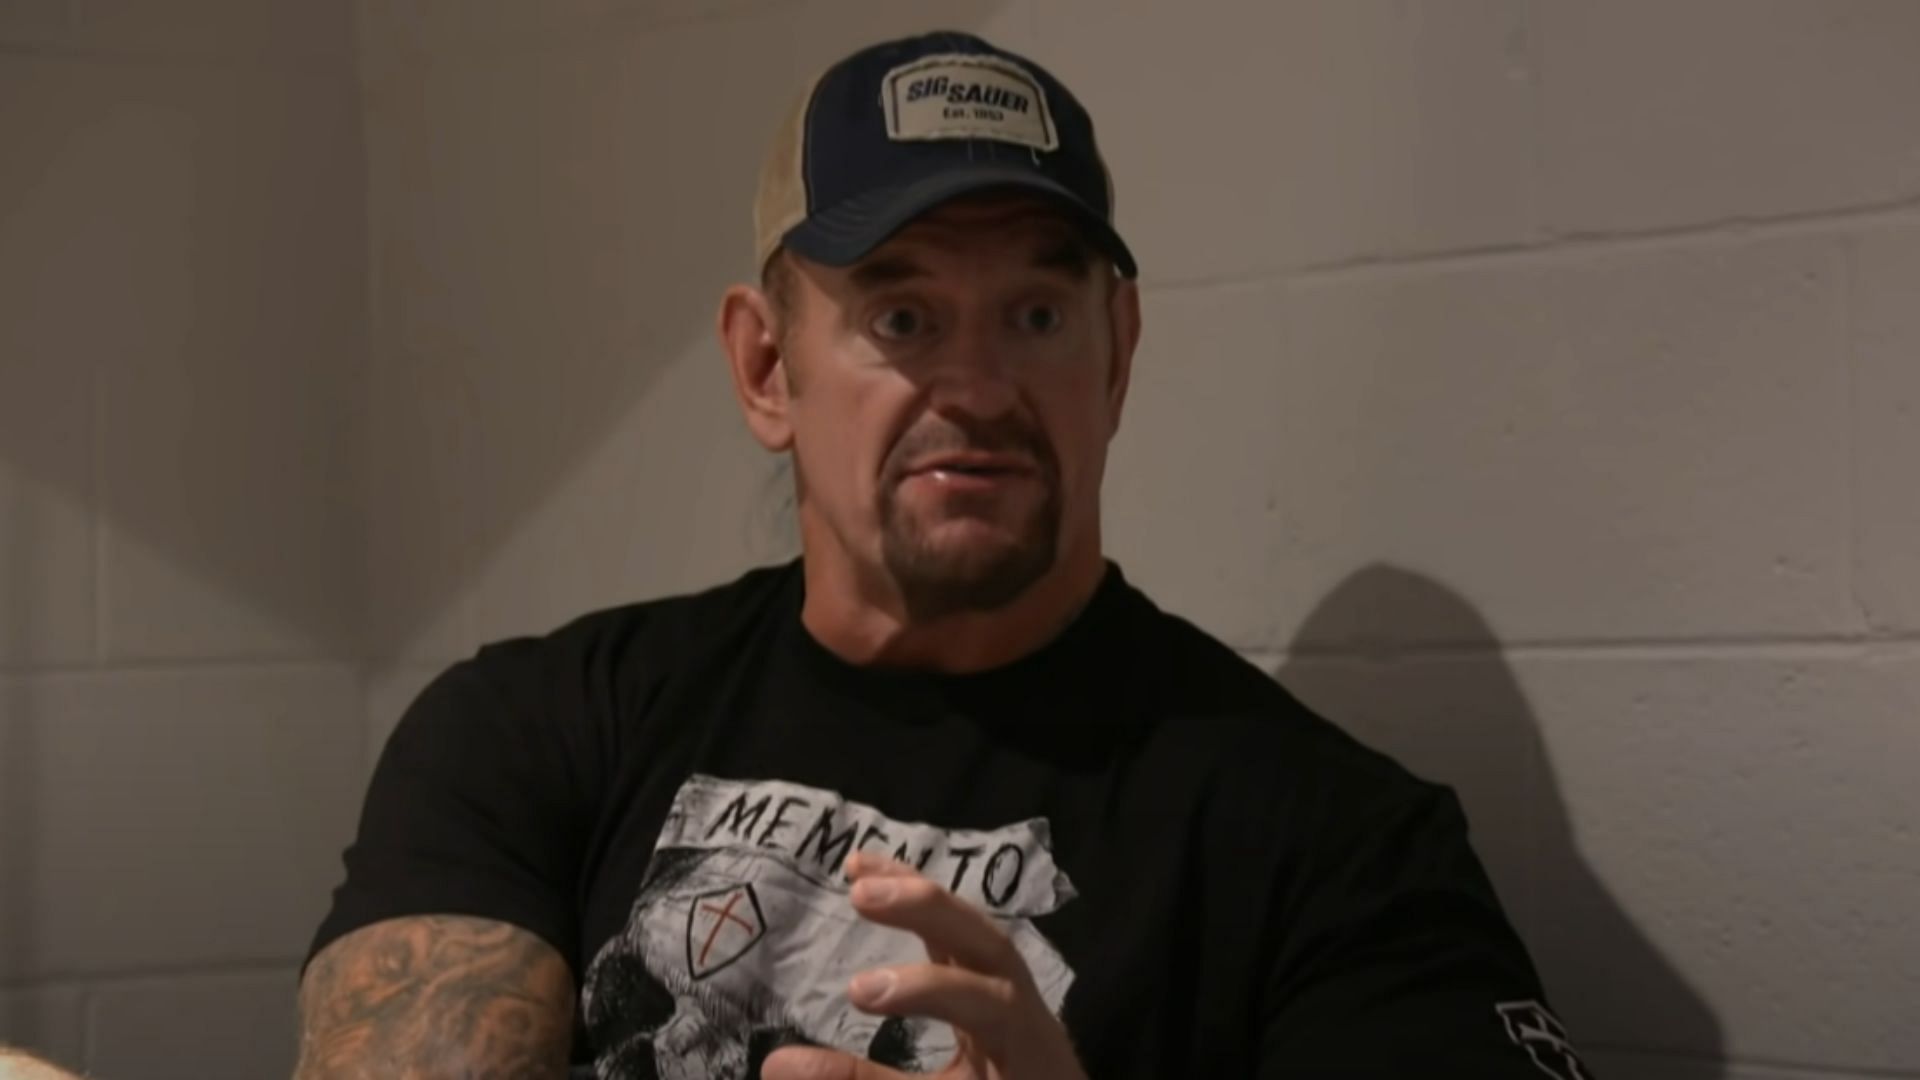 WWE Hall of Famer The Undertaker, real name Mark Calaway